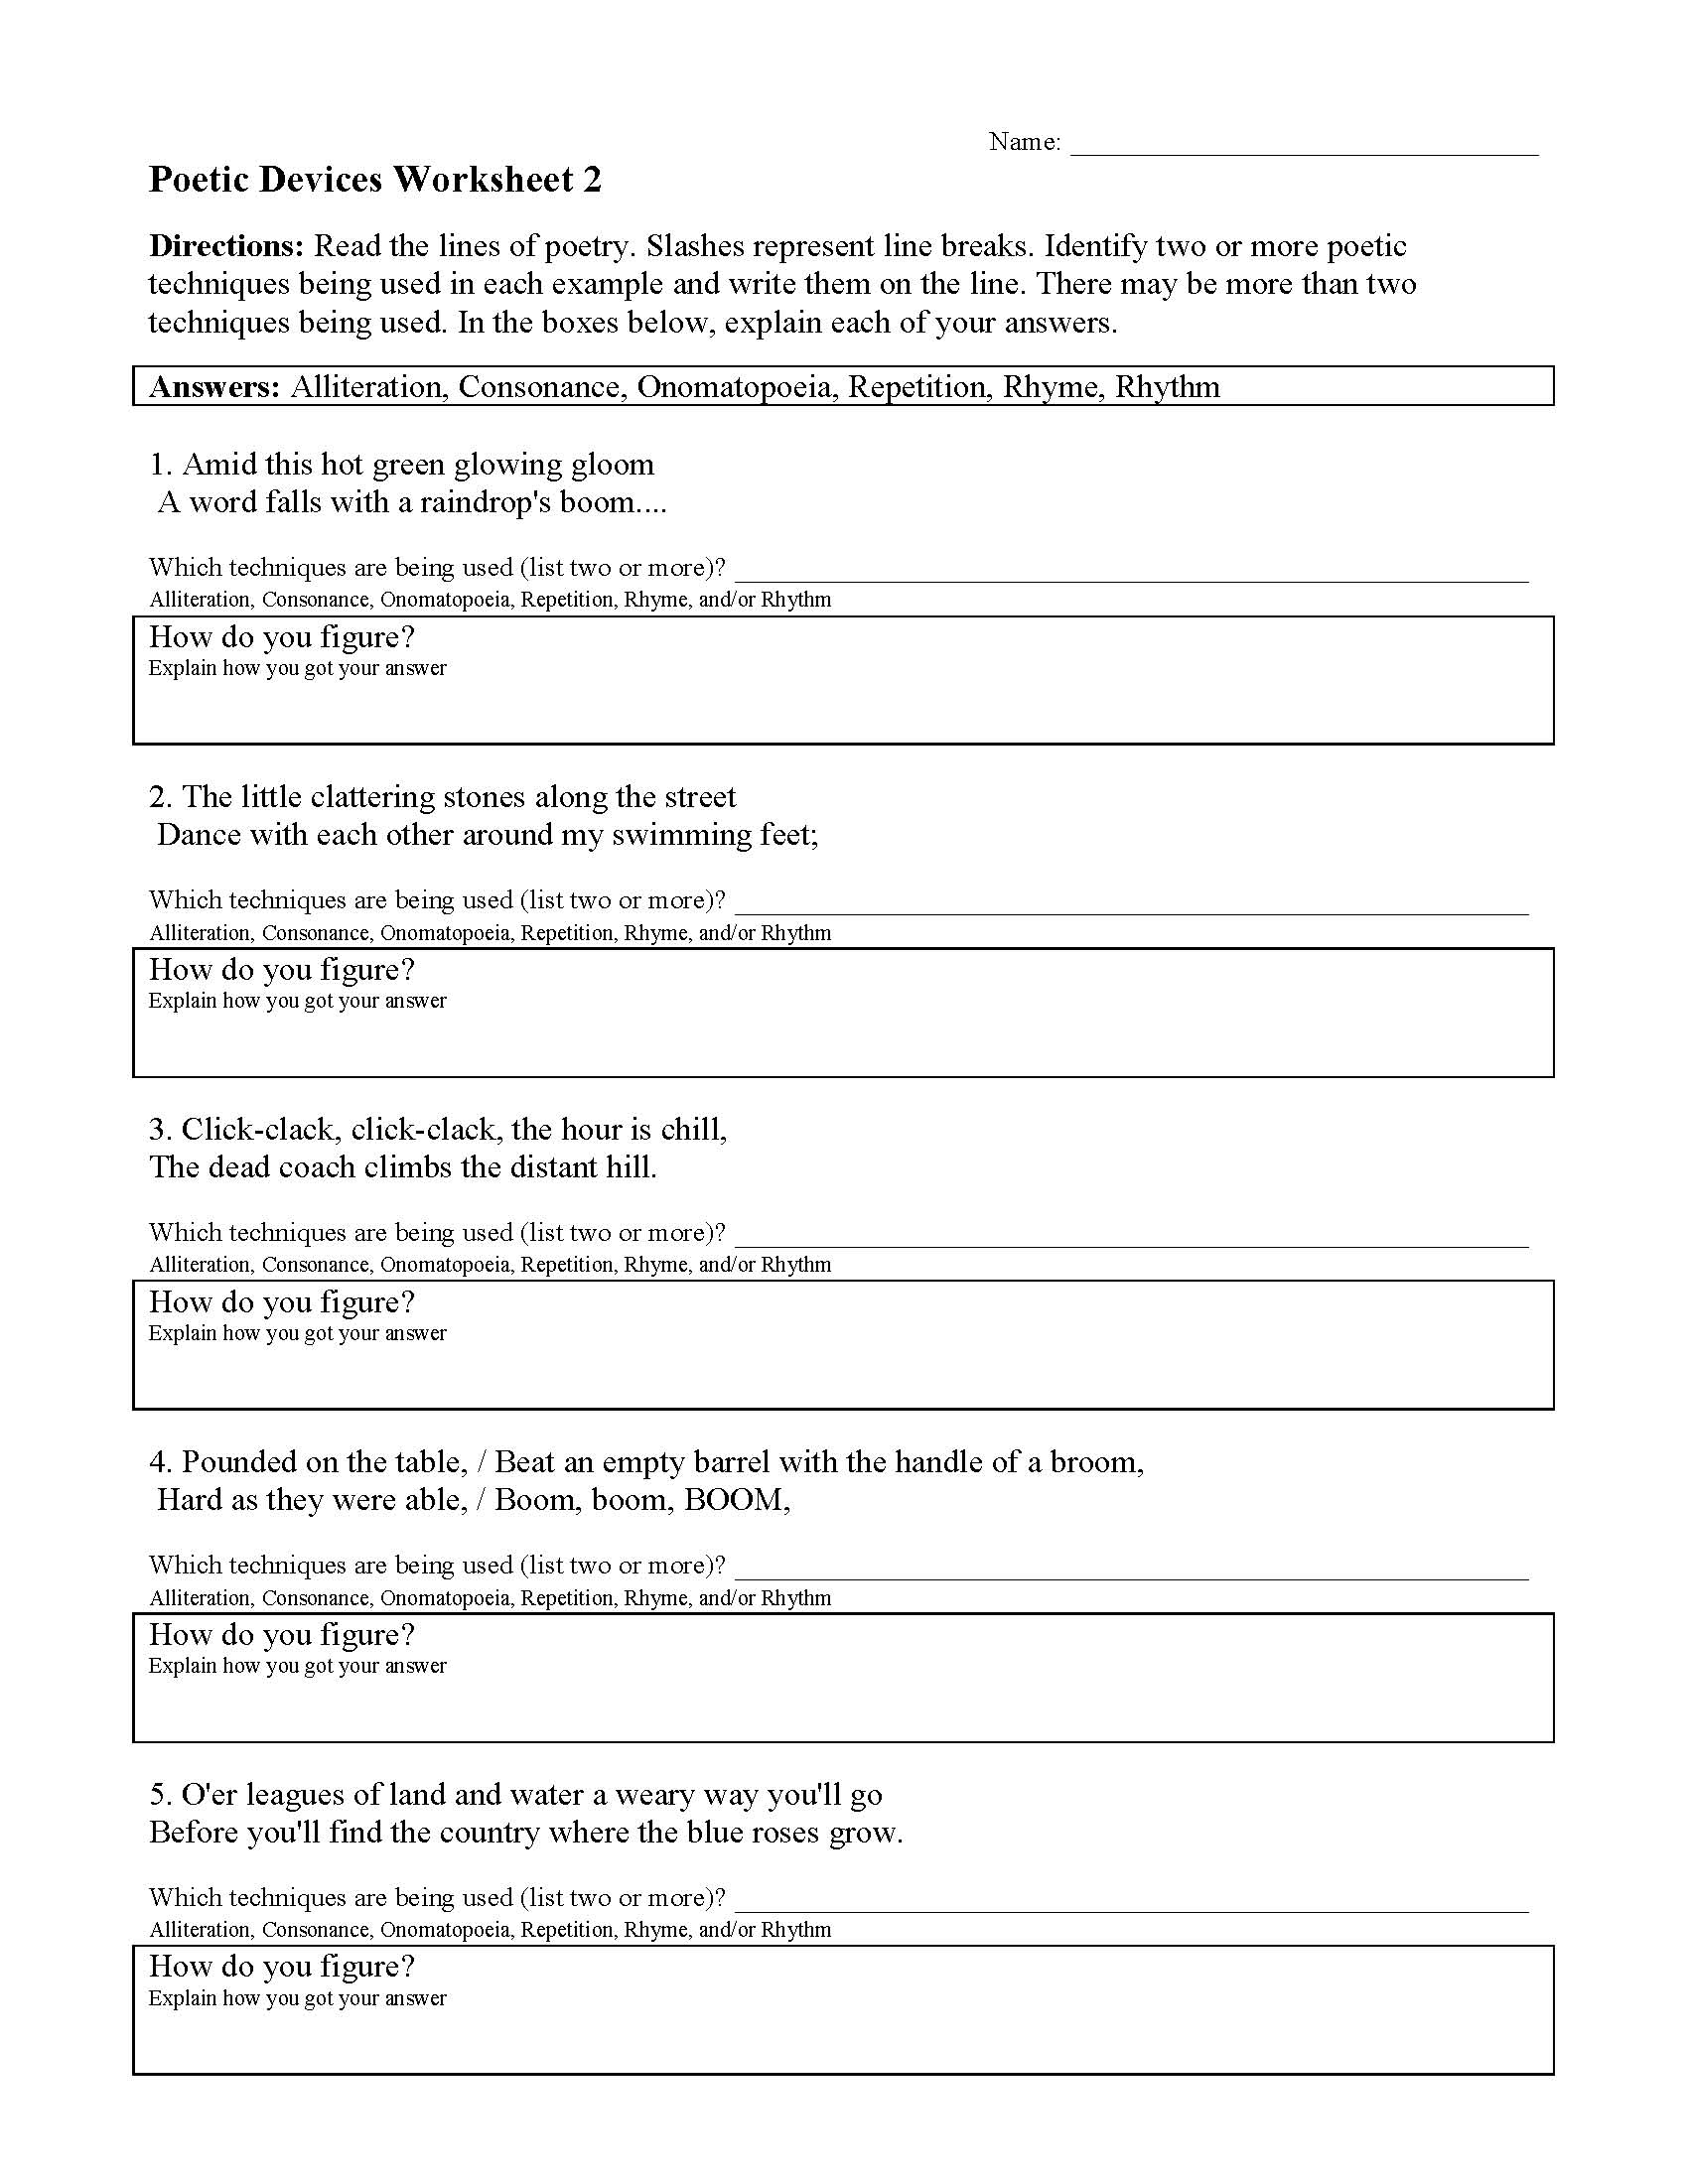 Poetic Devices Worksheet 10  Reading Activity With Regard To Sound Devices In Poetry Worksheet